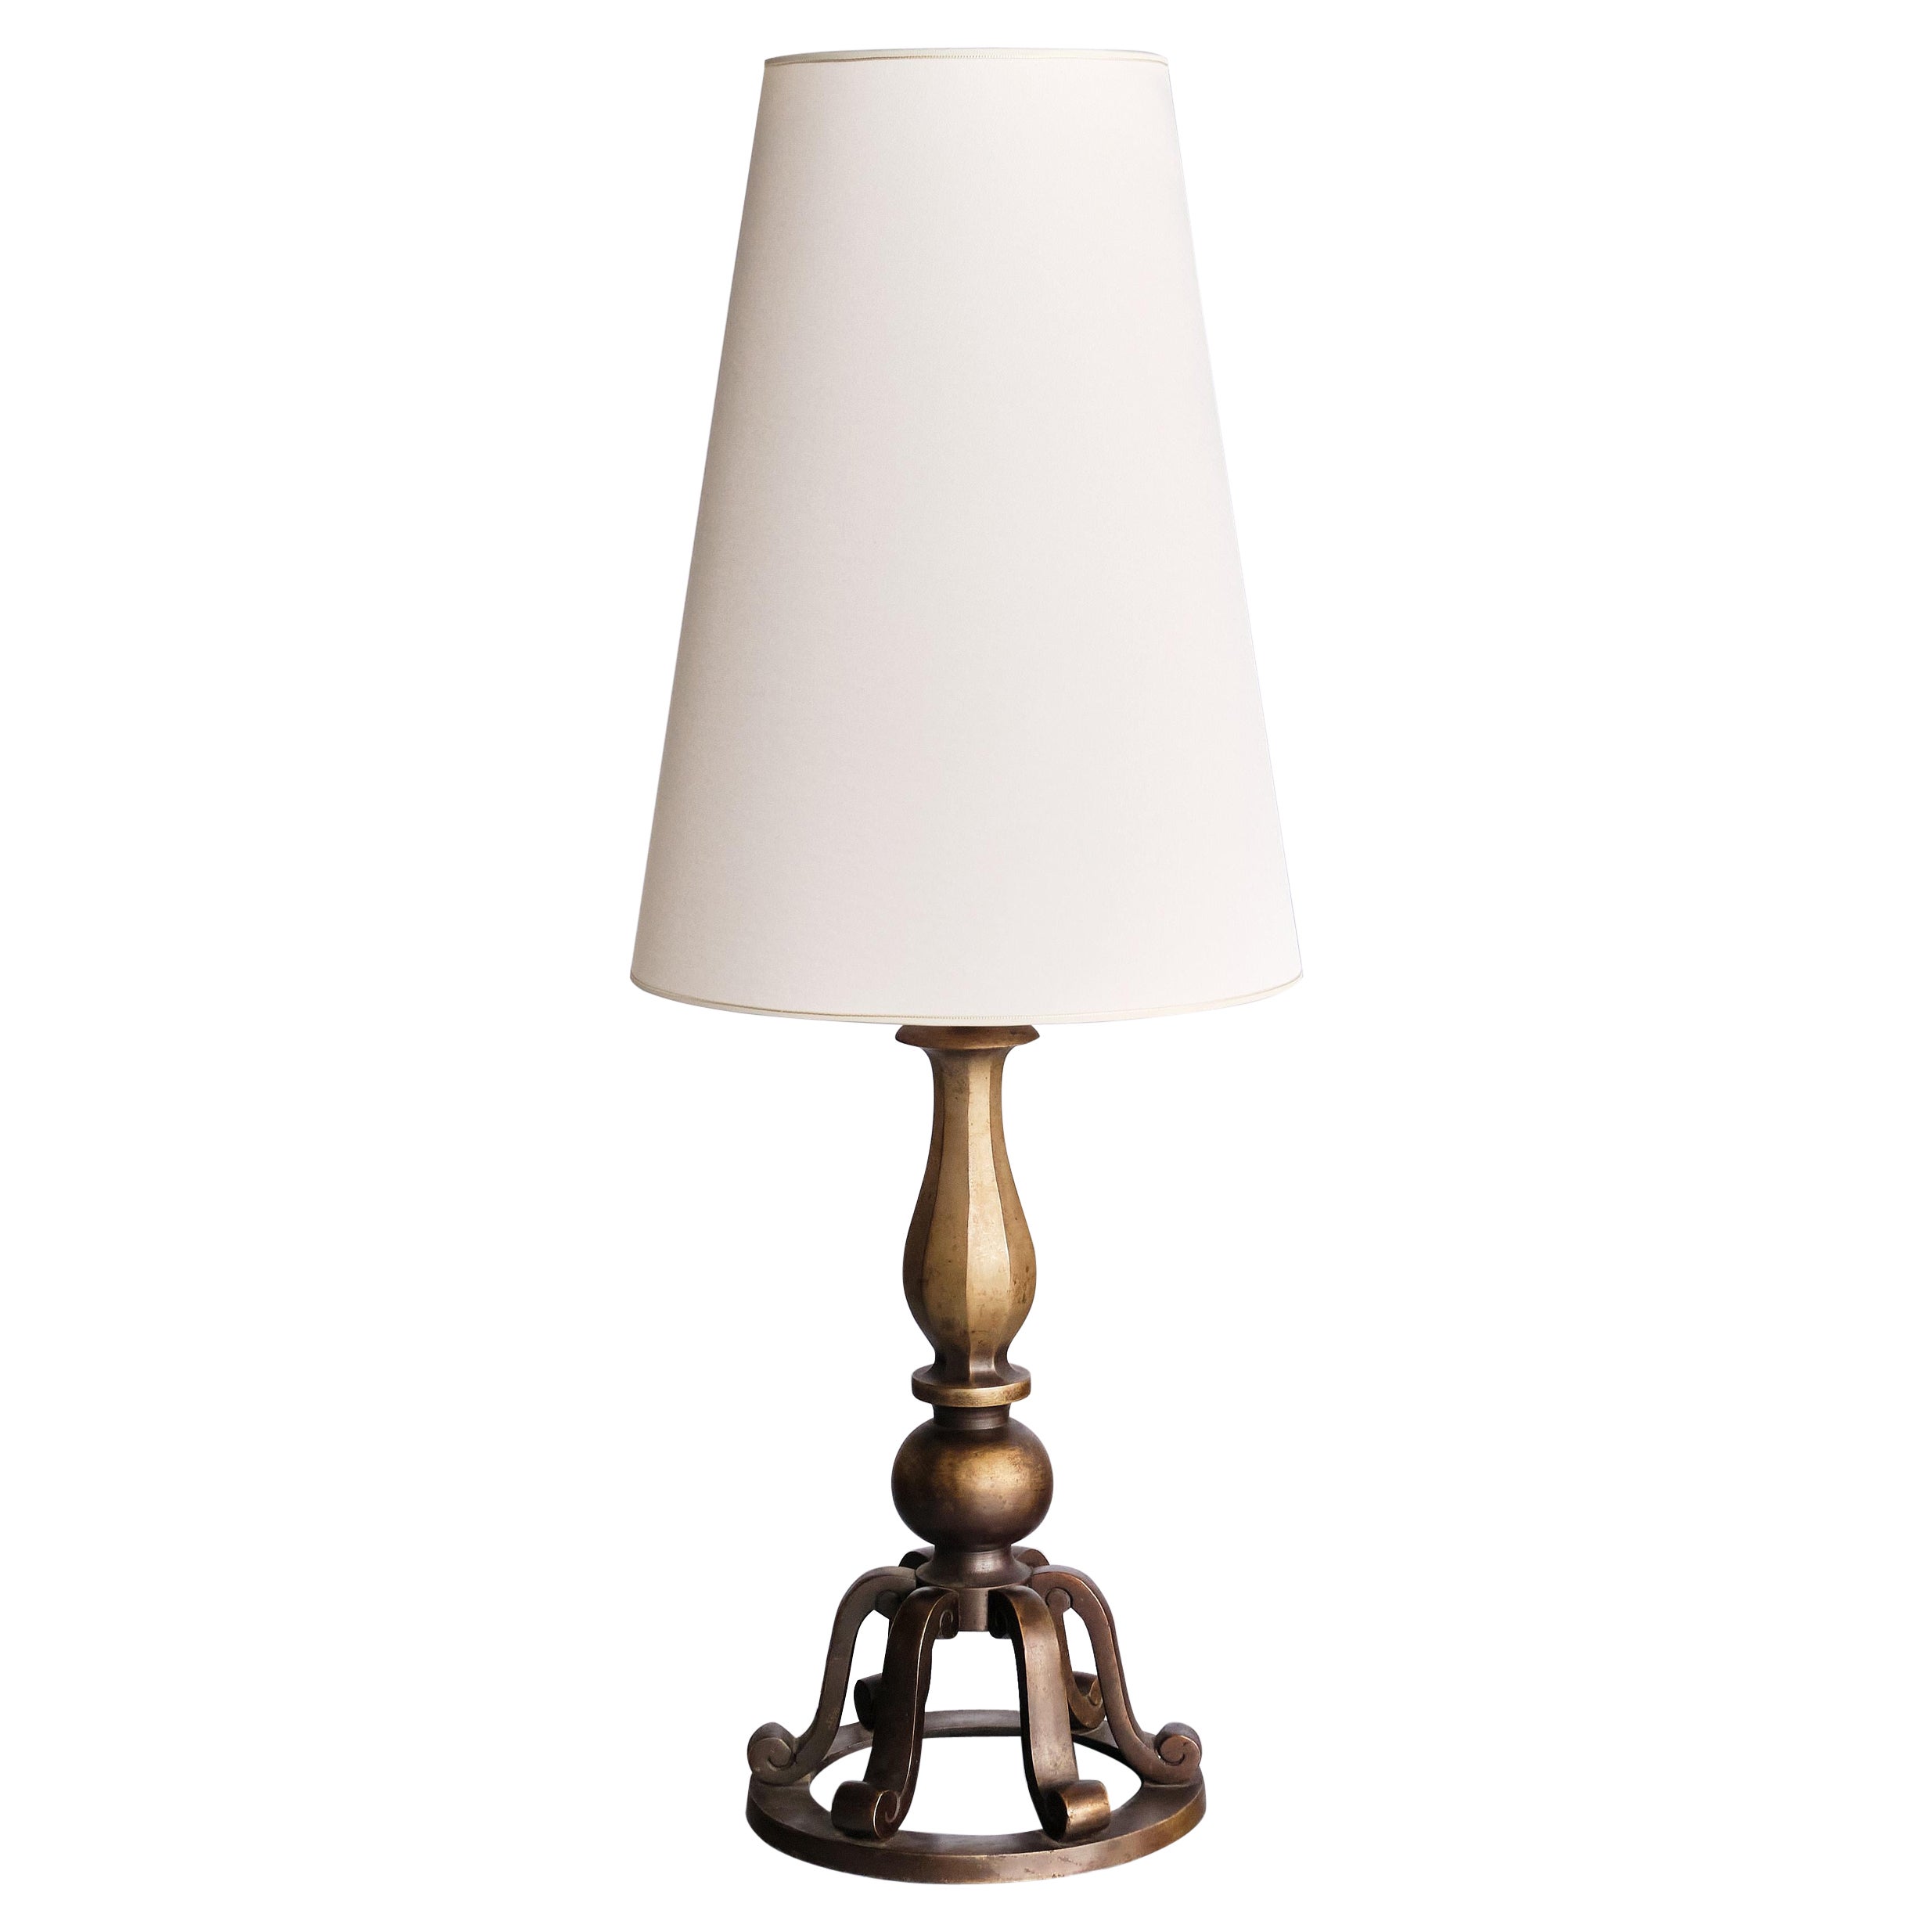 Swedish Grace Brass Table Lamp by C.G. Hallberg, Sweden, Early 1930s